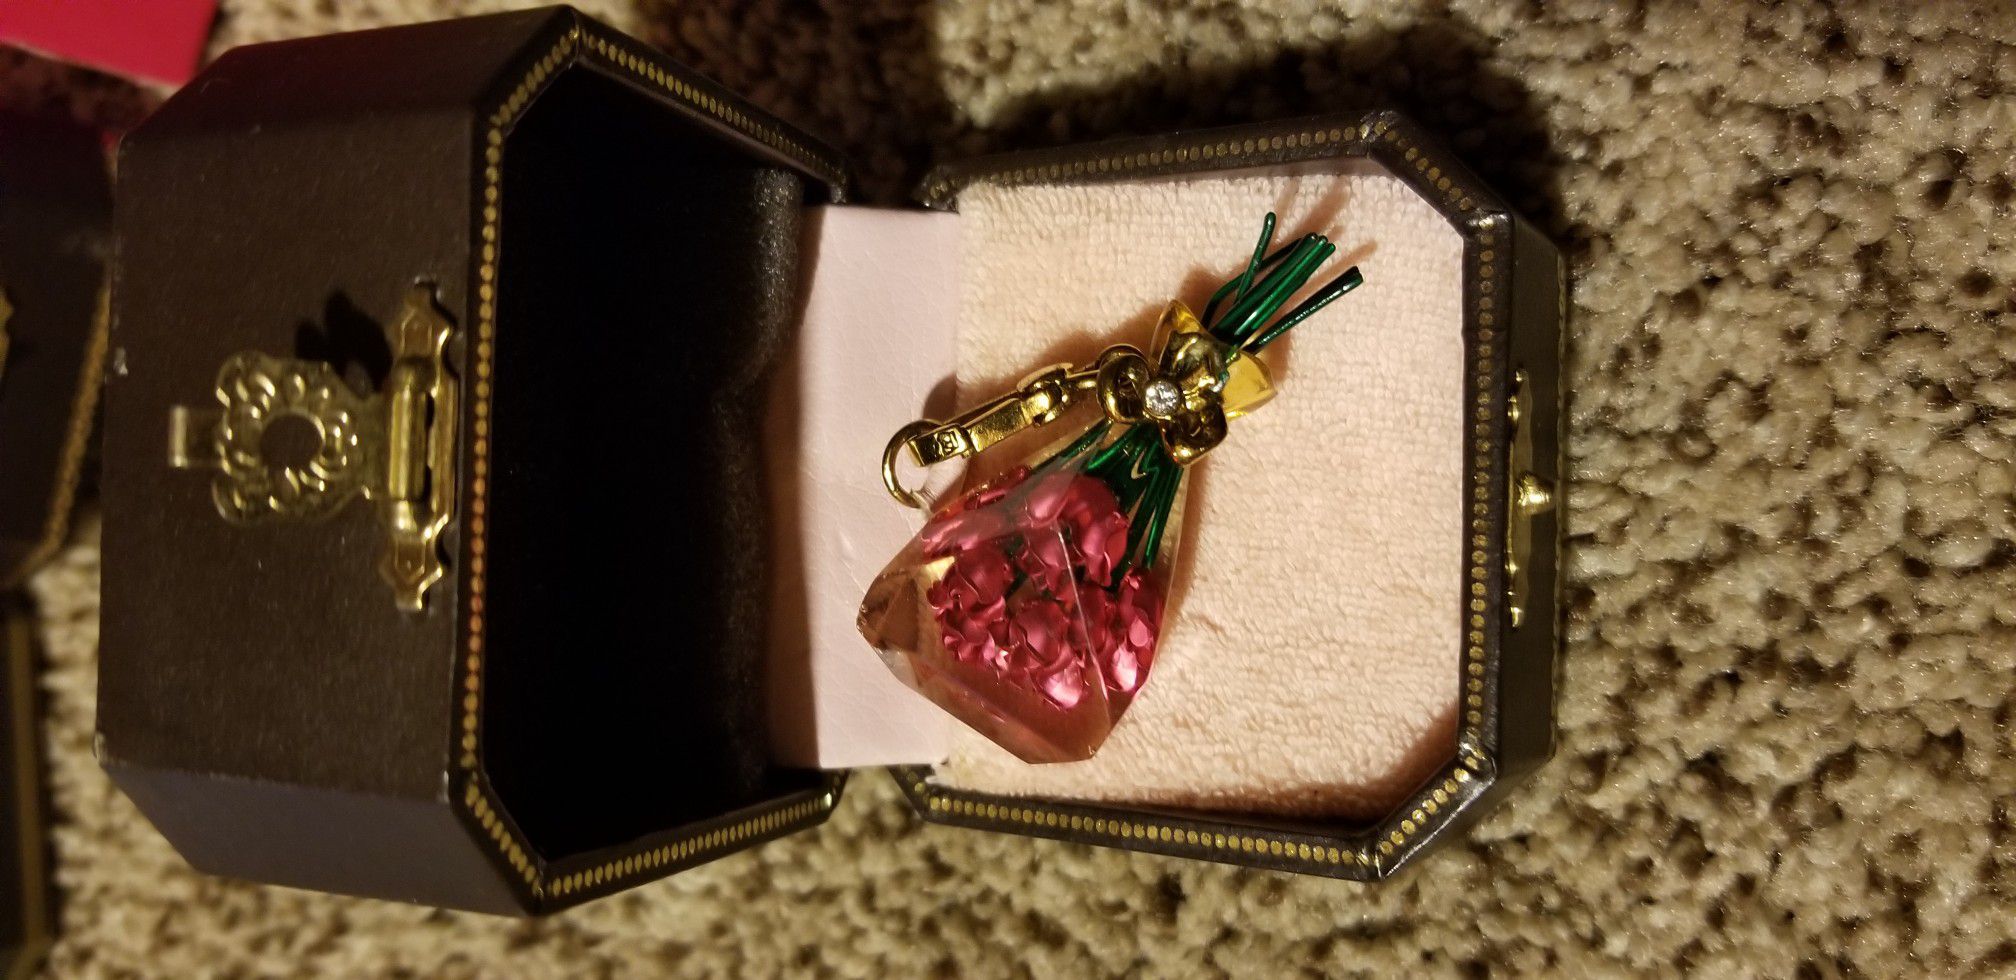 Juicy Couture Bracelet Making Kit for Sale in Dayton, OH - OfferUp